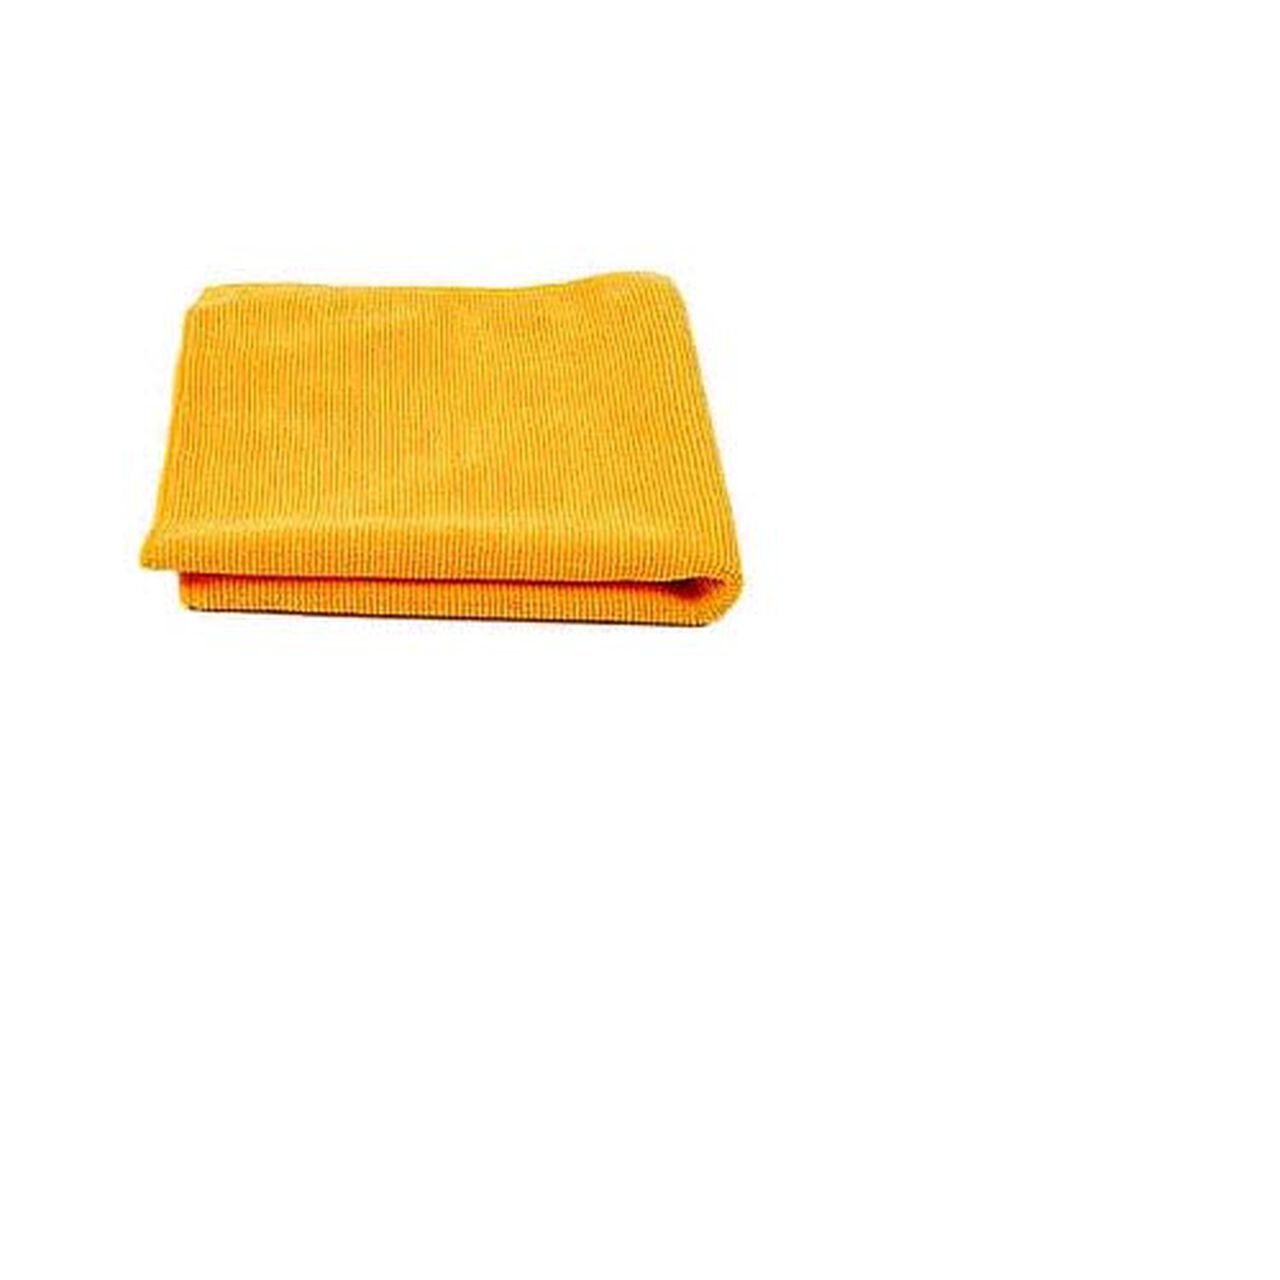 E-cloth Cleaning Pad #10602, , large image number 0